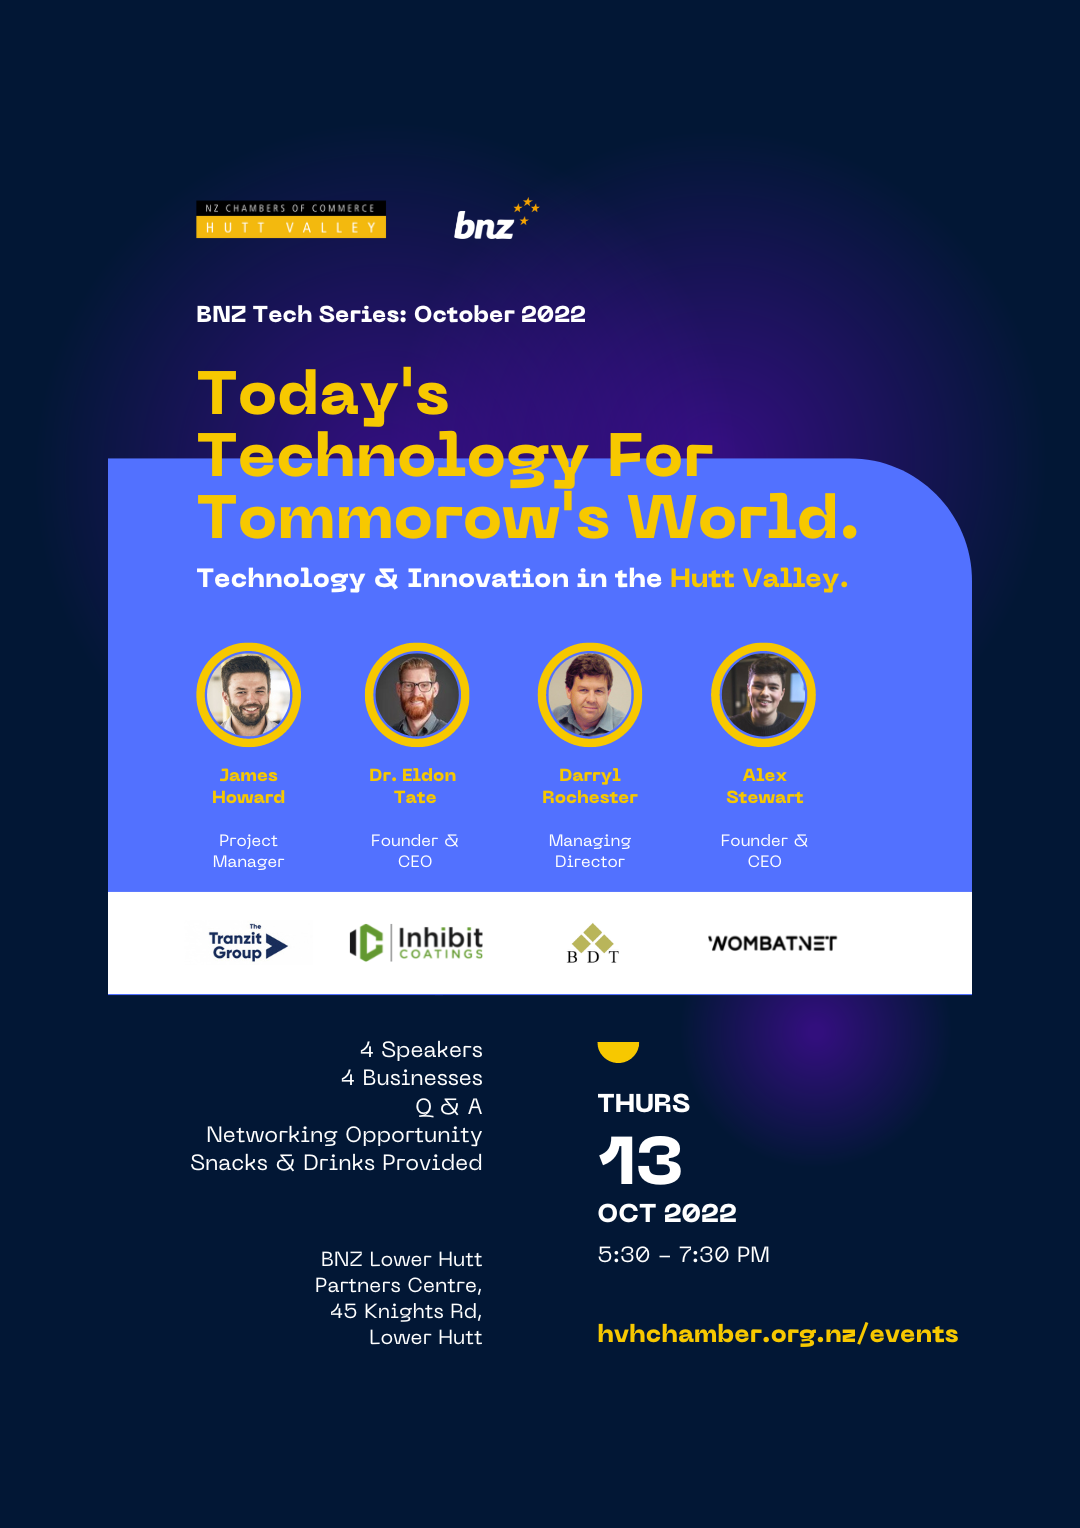 BNZ Tech Series 2022: Today's Technology For Tomorrow's World